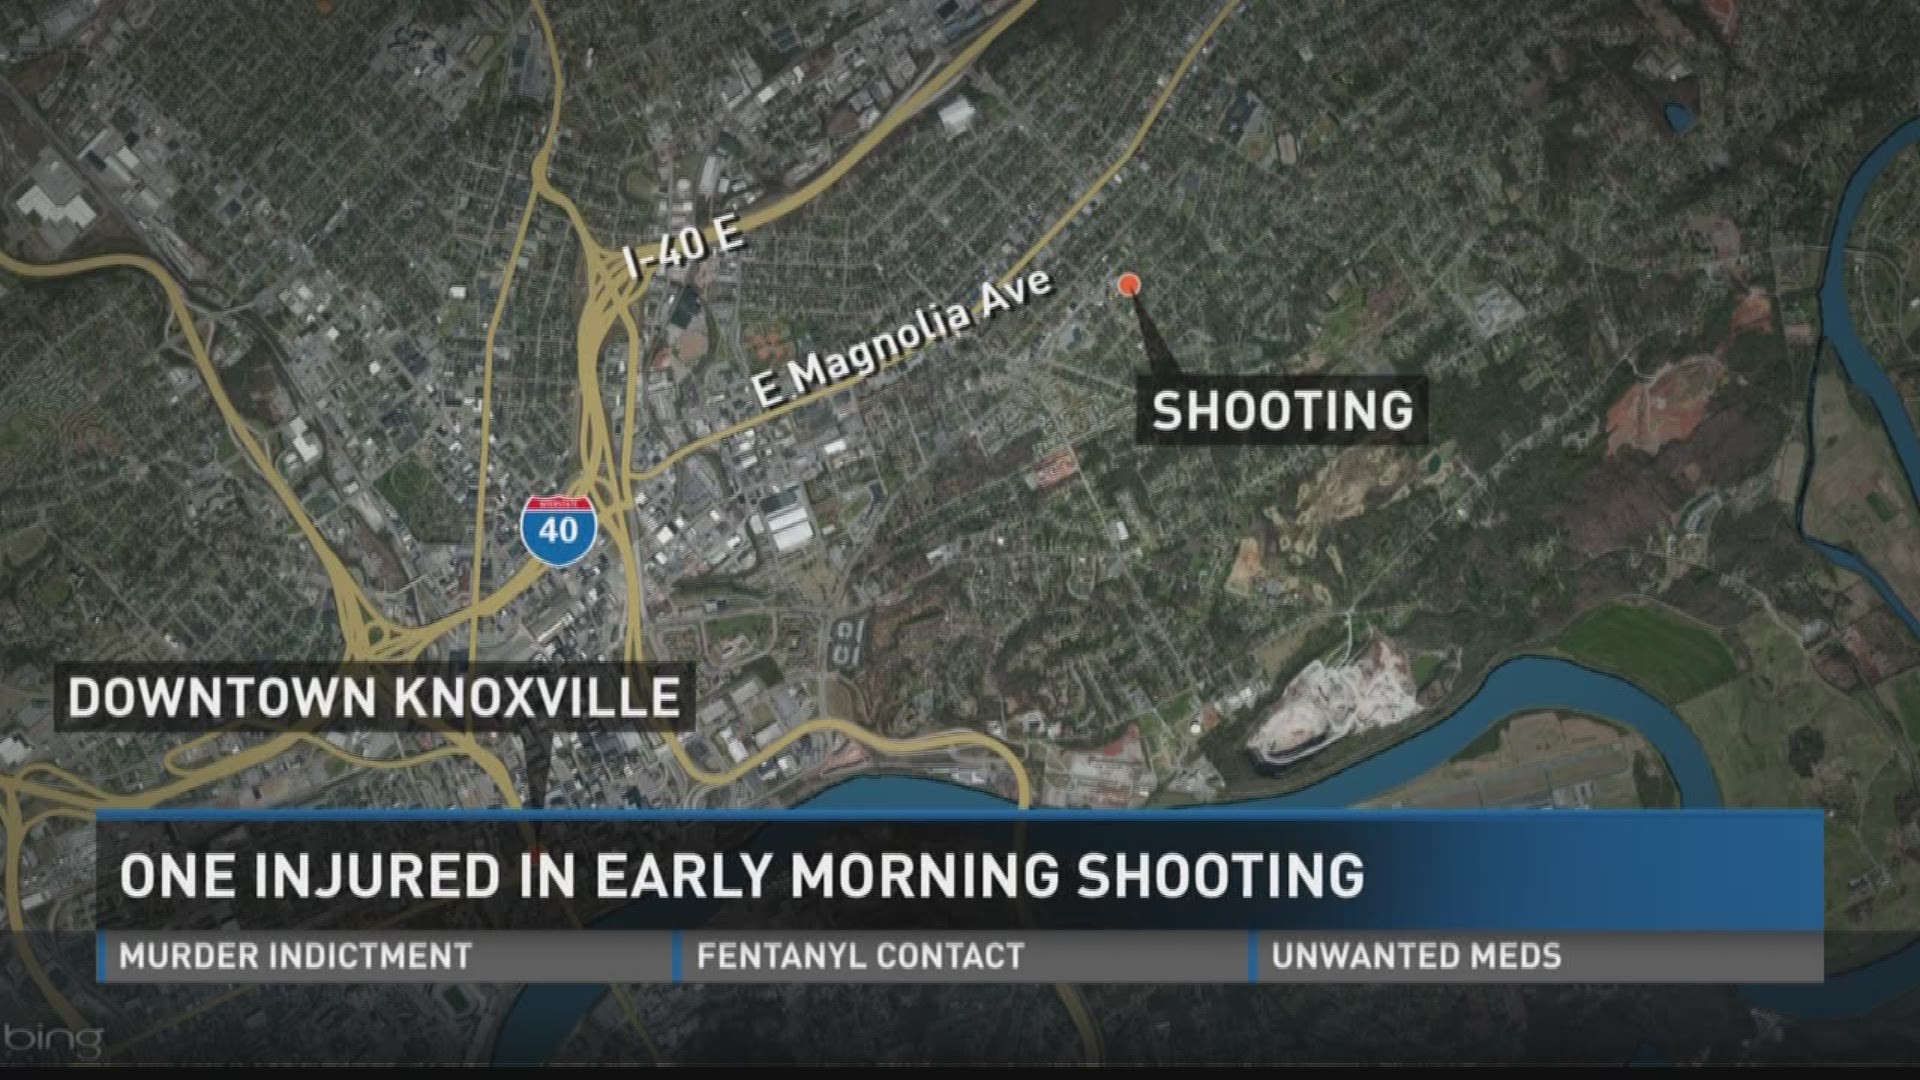 An East Tennessee man is recovering after a Friday morning shooting, according to the Knoxville Police Department.